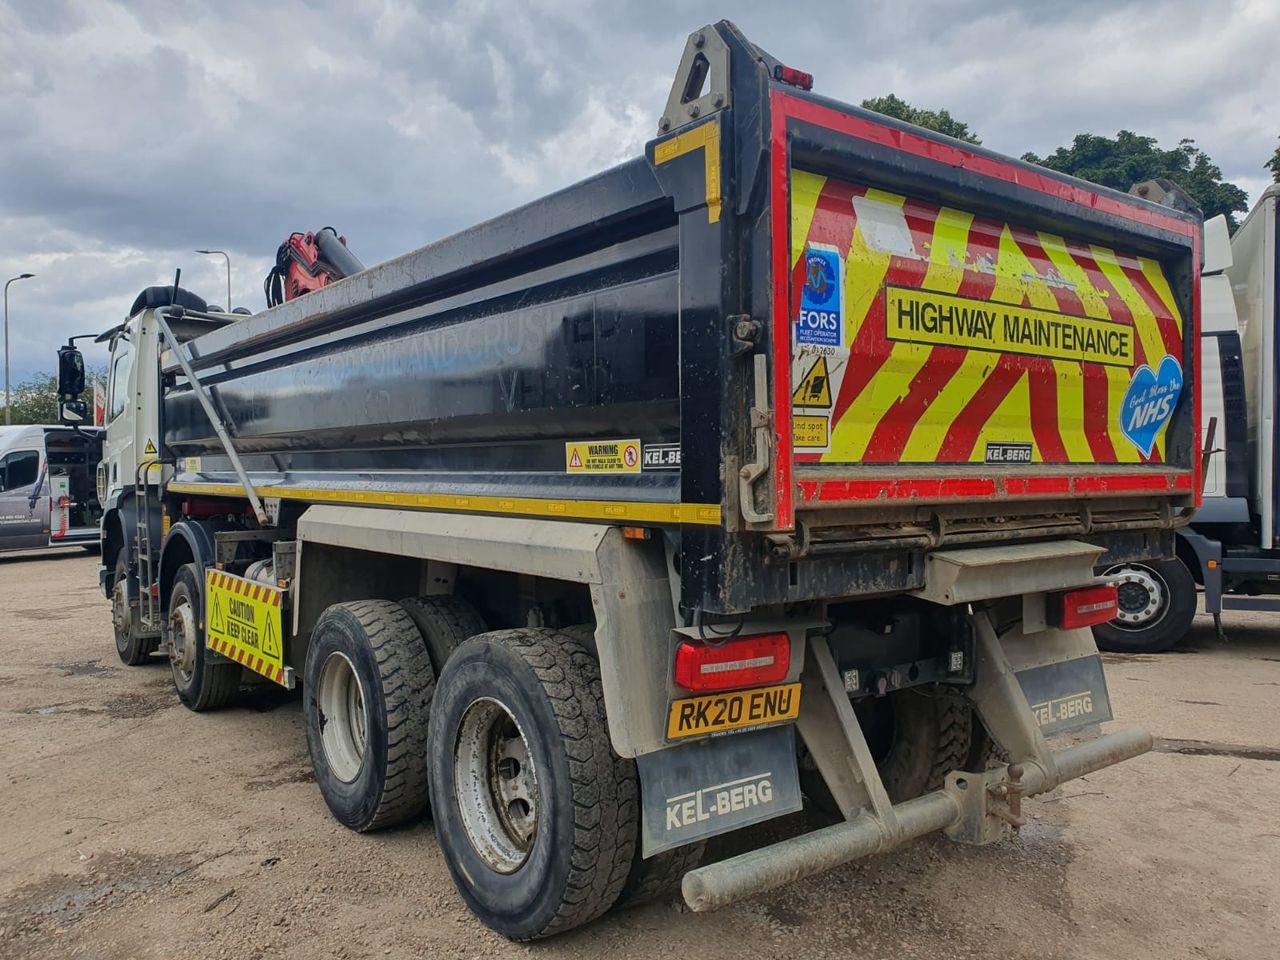 Ready to go DAF CF 450, Tipper Grab, 450, 32 Tonne, Day Cab, Automatic, AdBlue Tank - 45 Litre, Air Conditioning, Bumper Mounted Fog Lights, Cab Sunvisor , Cruise Control, , Palfinger Epsilon, Epsilon M125L | for sale at MV Commercial, the UKs leading Truck, Trailers and Van supplier. (RK20ENU 102931)